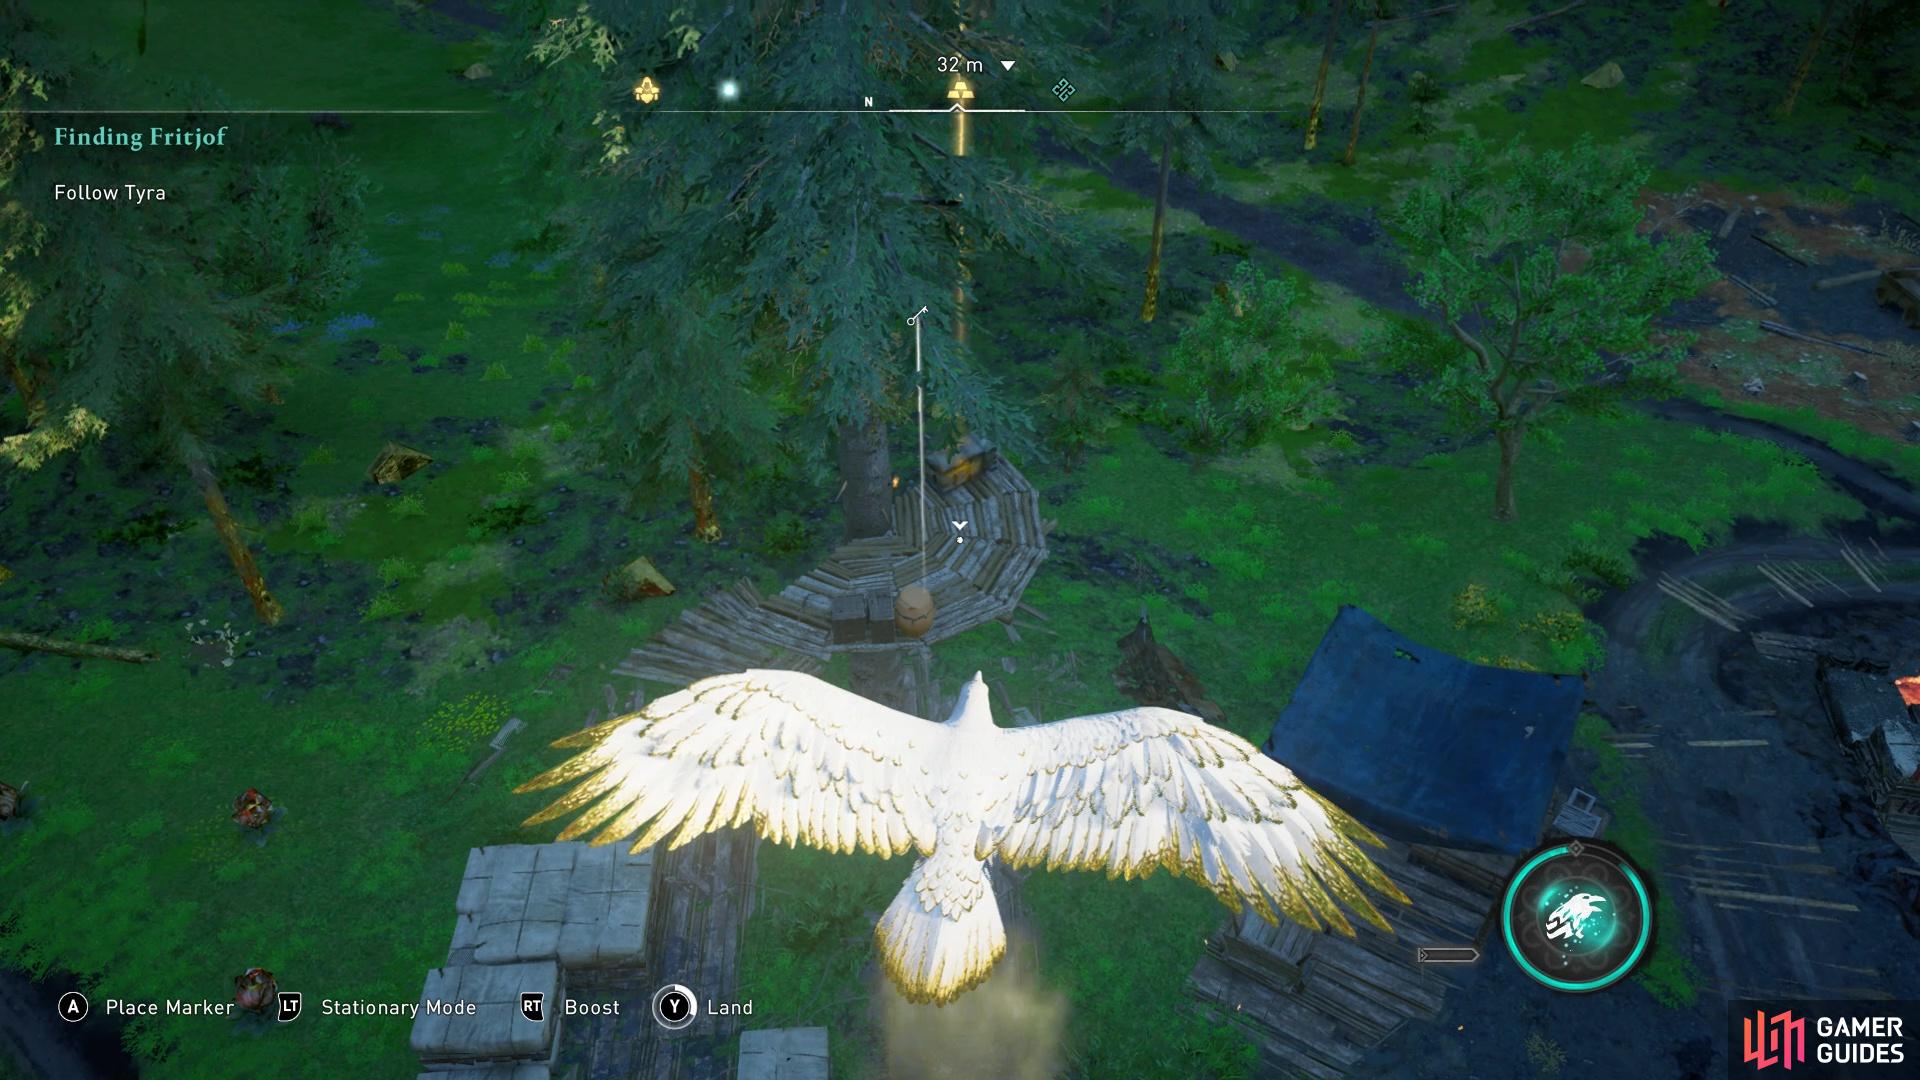 Use the Power of the Raven to fly up to the platform!